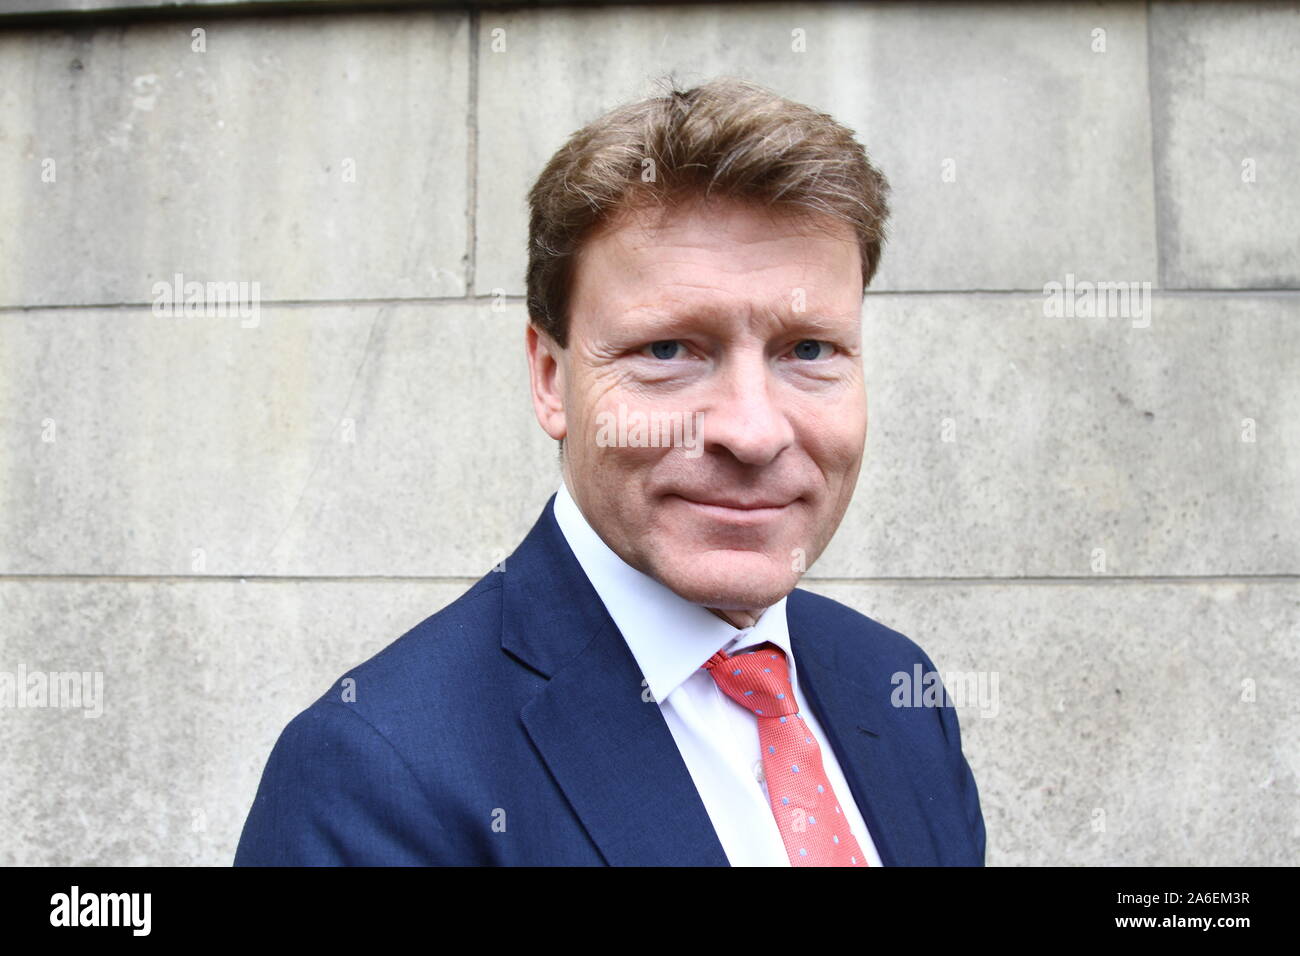 Richard Tice Chairman of the Brexit Party pictured in the City of Westminster on 25th October 2019. Richard James Sunley Tice is a member of the European parliament for the East of England. [ MEP ] MEPS. British politicians. Politics. UK Politics. Brexit. Leave means leave. Famous politicians. GB News. Russell Moore portfolio page. Stock Photo